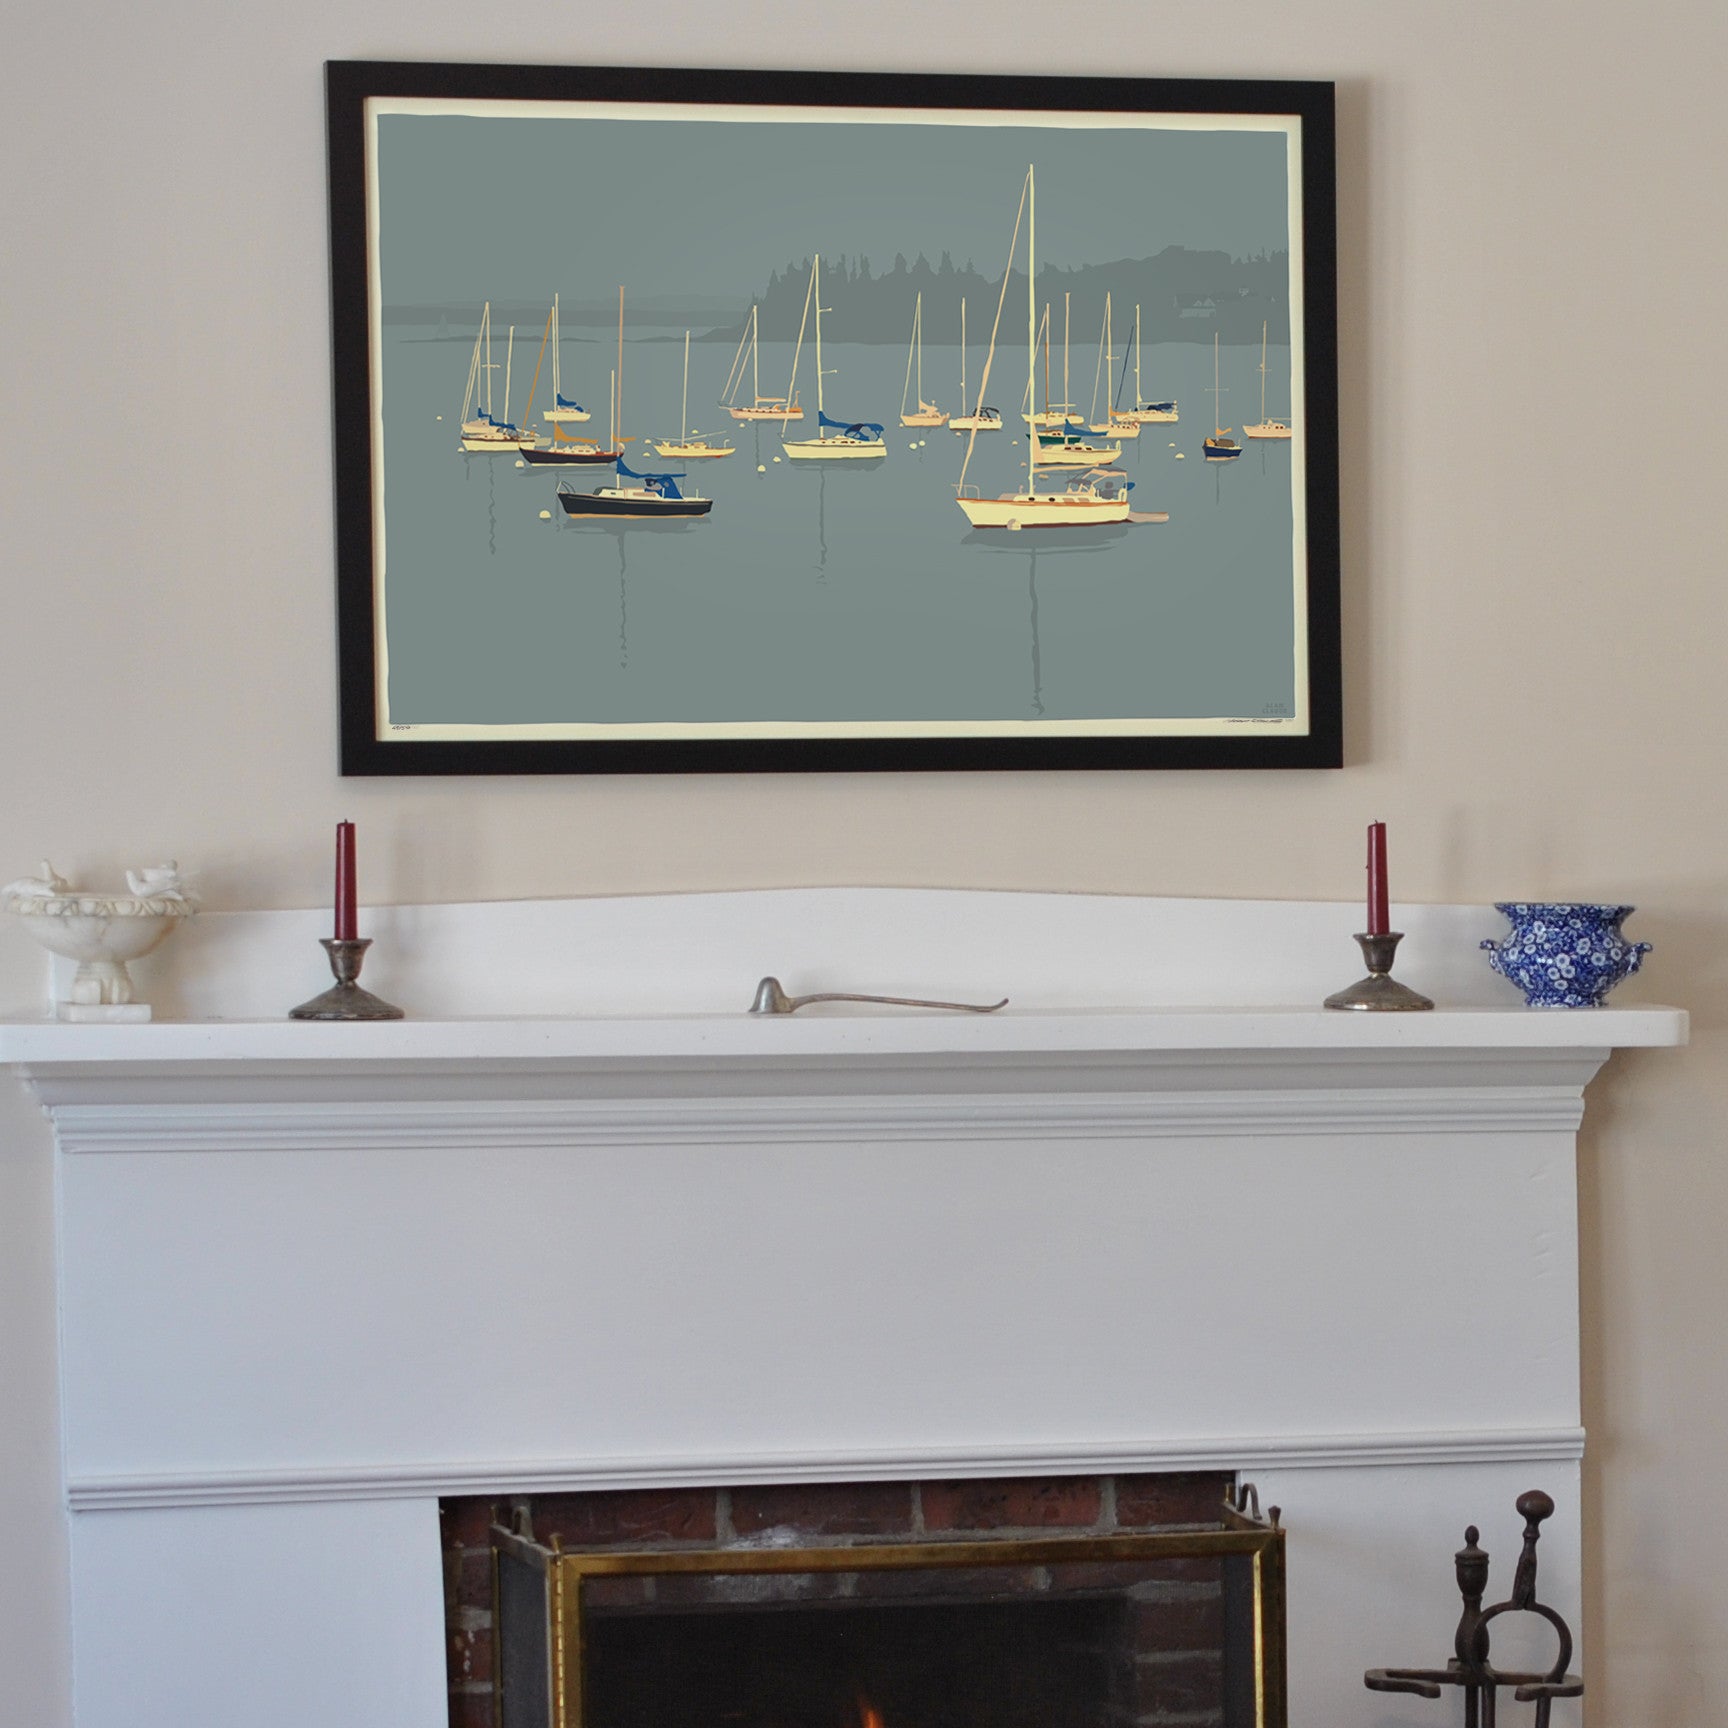 Sailboats in Rockland Harbor Art Print 24" x 36" Framed Wall Poster By Alan Claude  - Maine